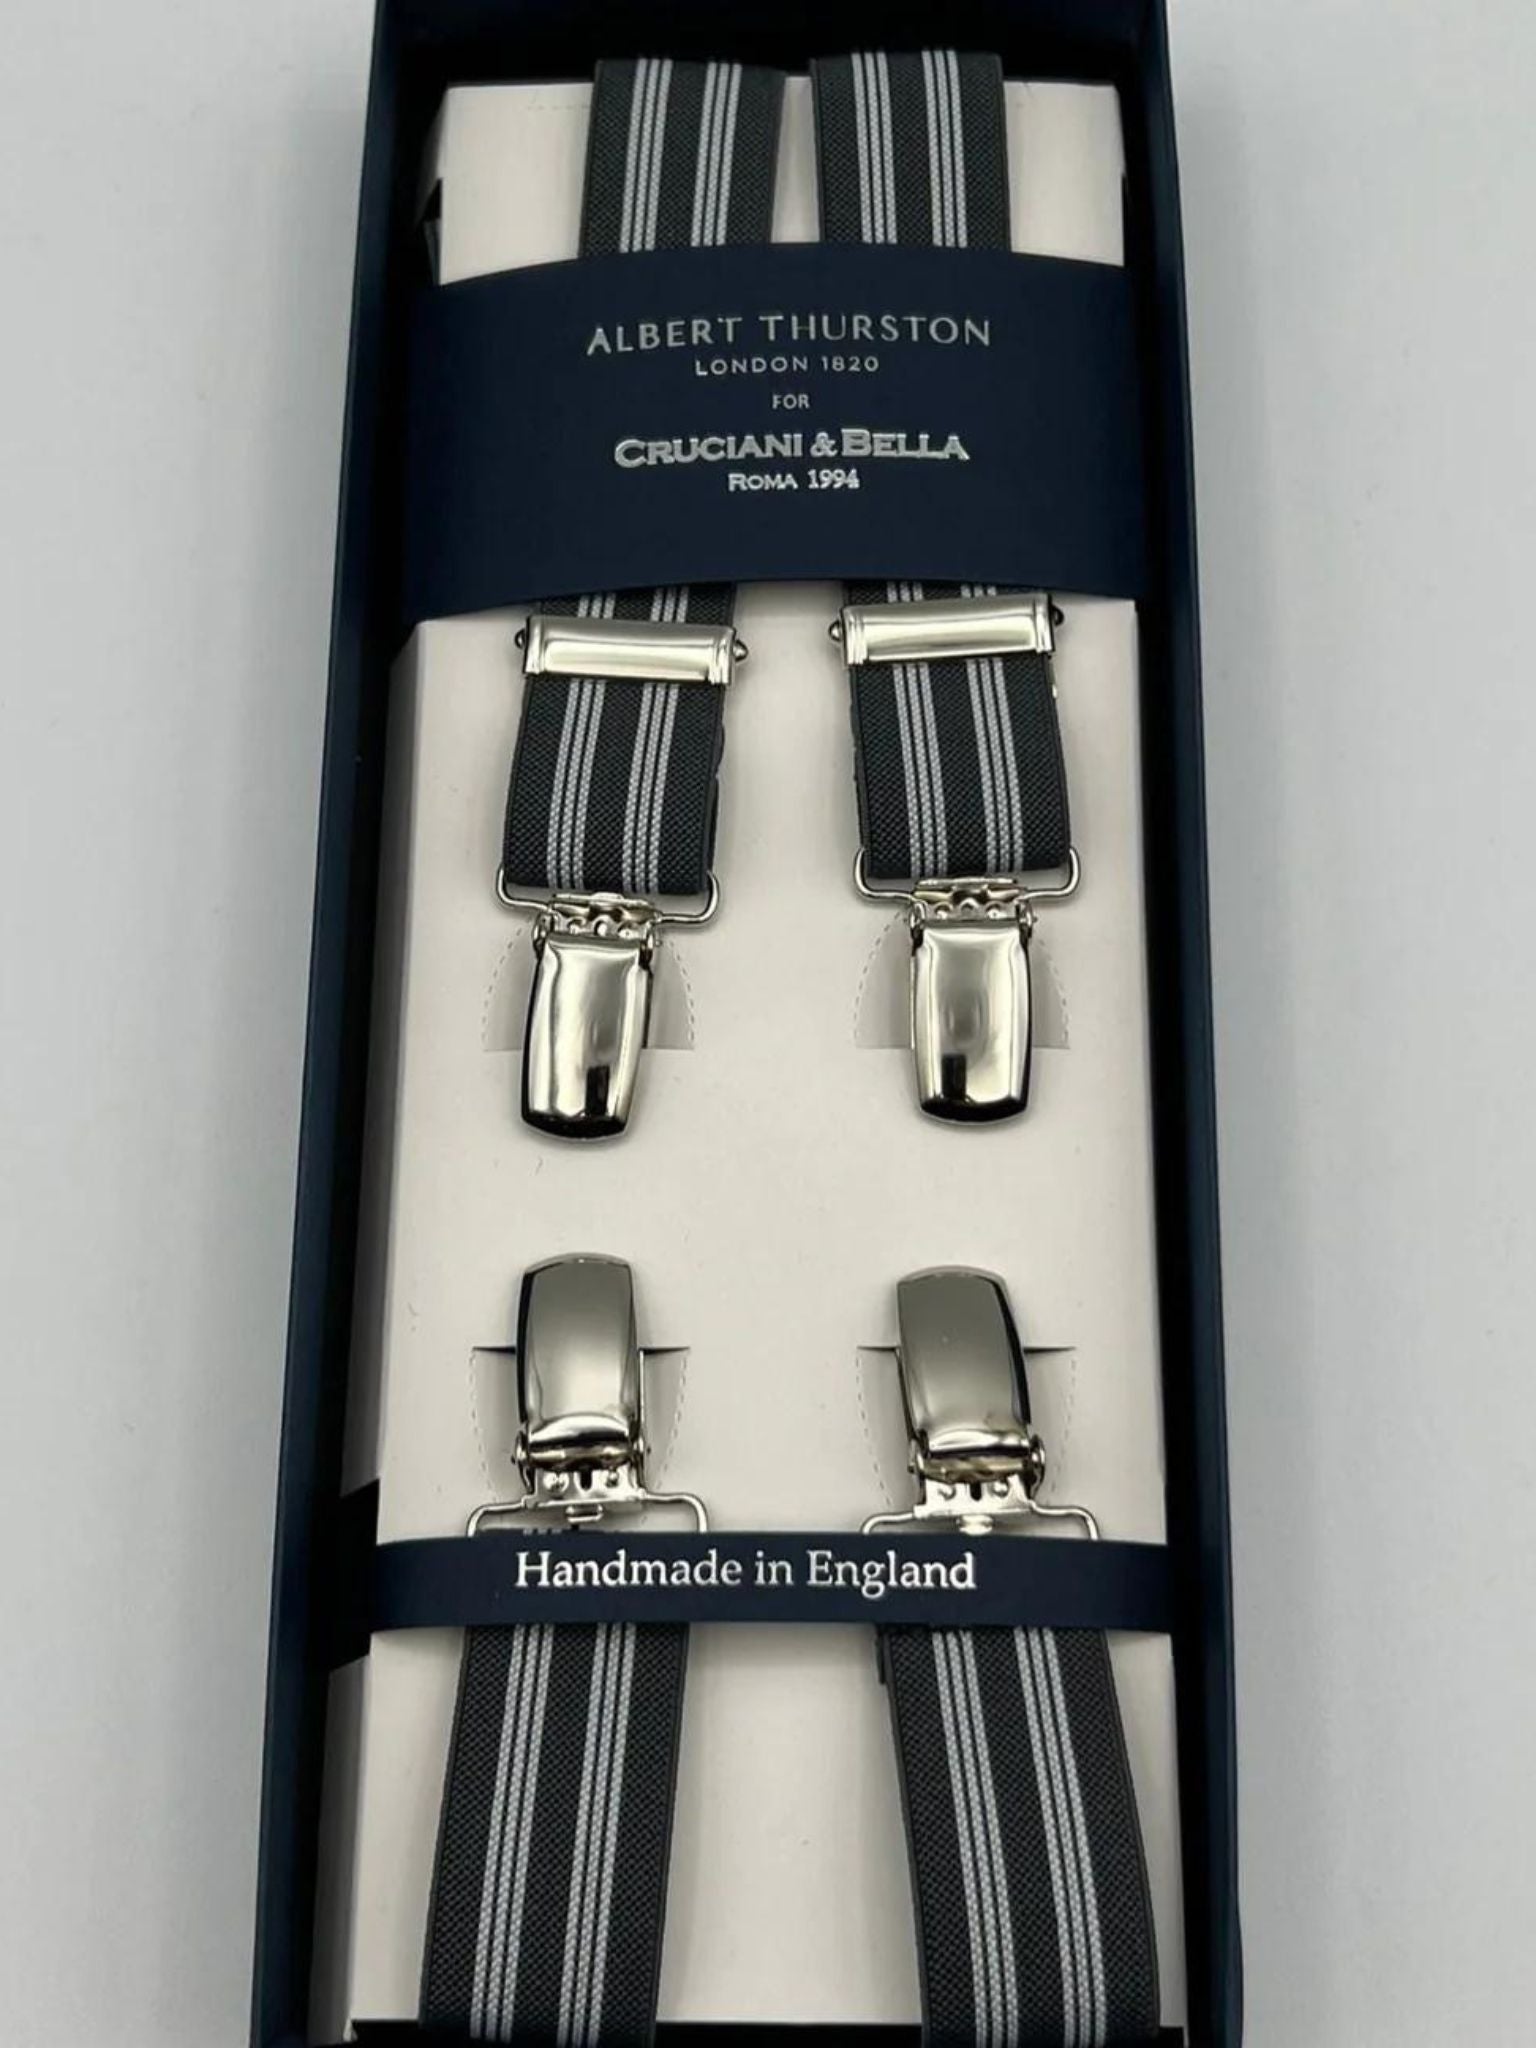 Albert Thurston for Cruciani & Bella Made in England Clip on Adjustable Sizing 25 mm elastic braces Grey, White Stripes X-Shaped Nickel Fittings Size: L